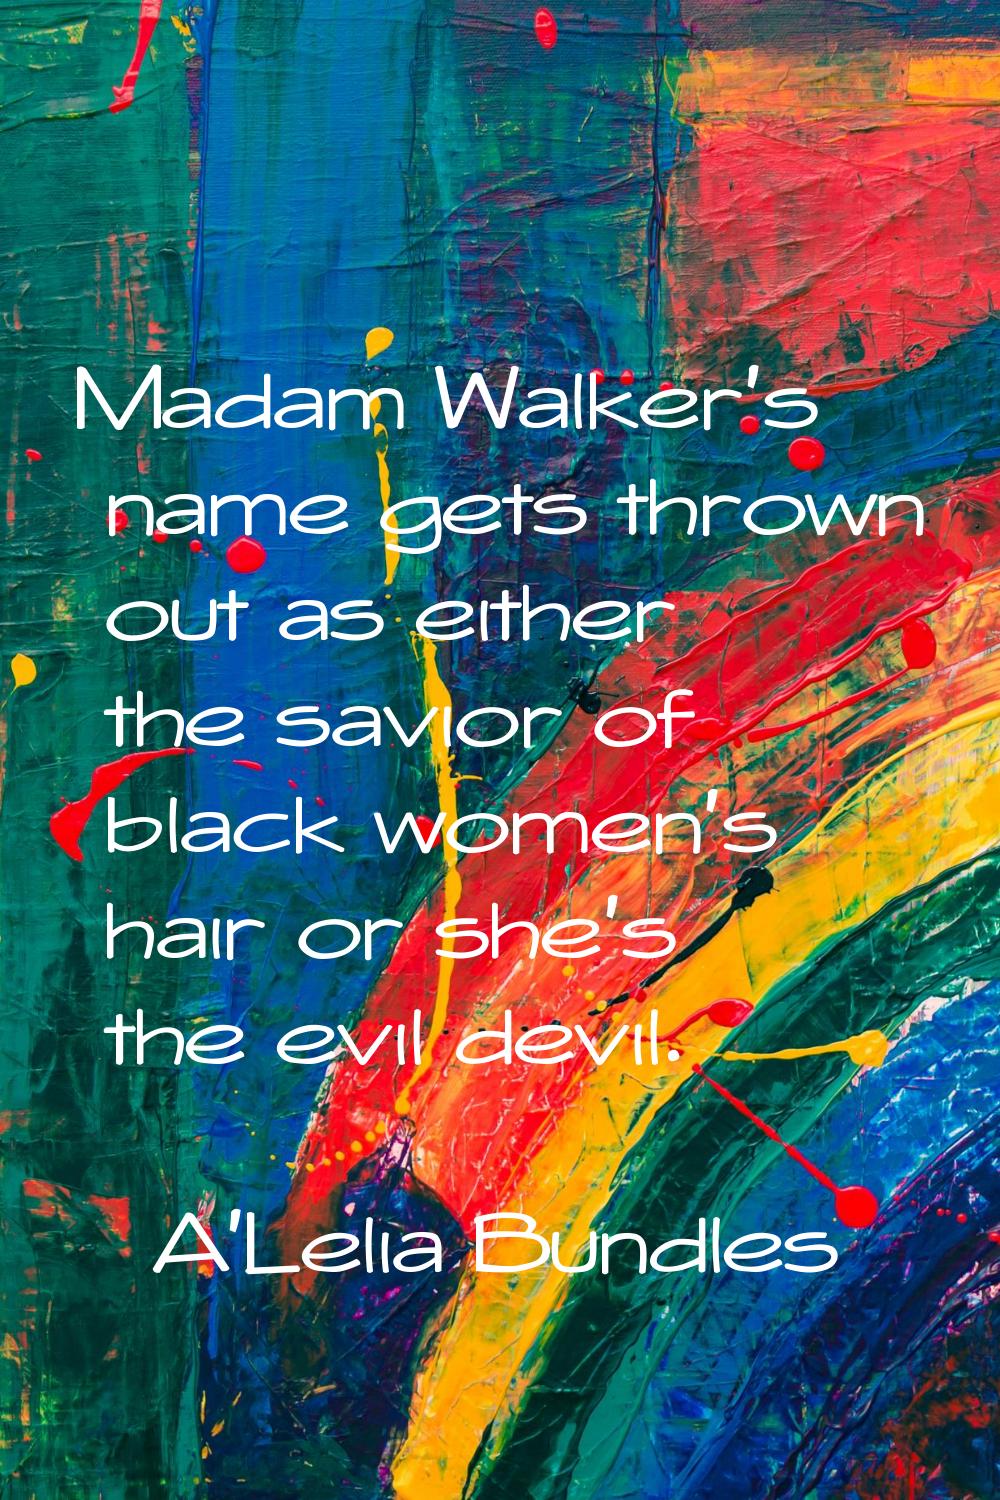 Madam Walker's name gets thrown out as either the savior of black women's hair or she's the evil de